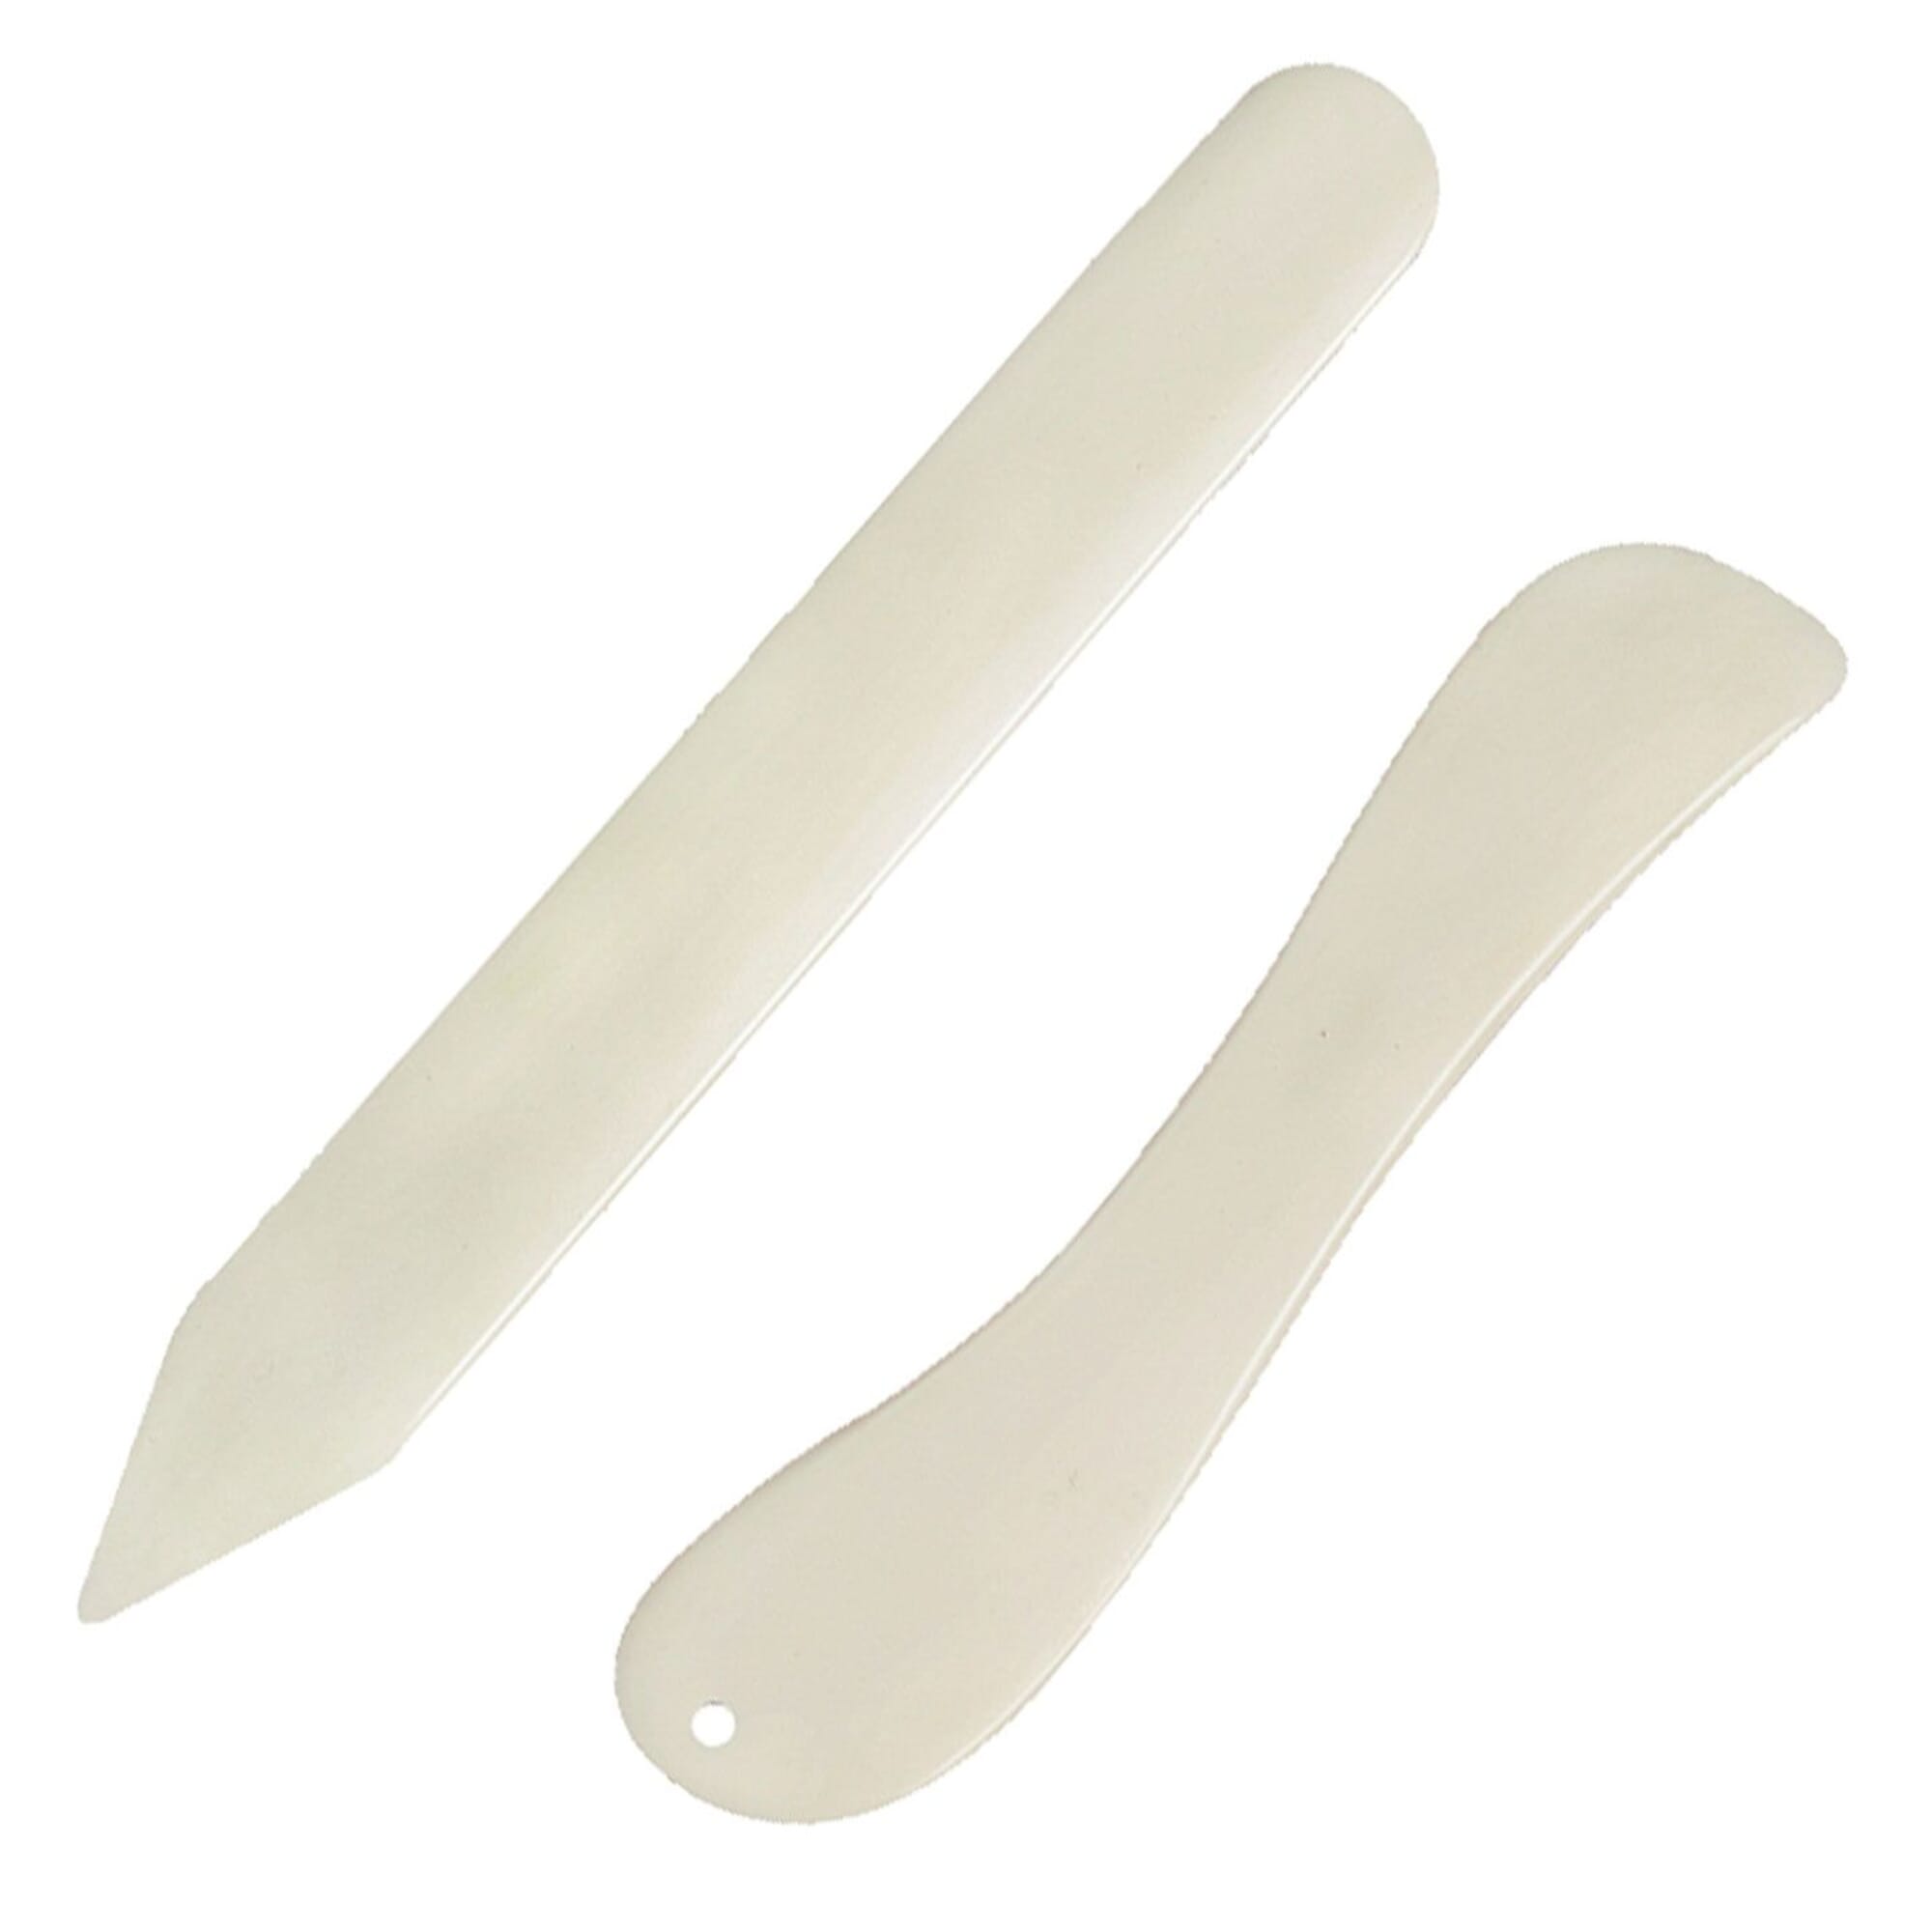 Generic Brand Leathercraft Tool 2 PC Plastic Bone Folder Leather Edge Slicker and Creaser Set, for Leatherworking and Papercrafts